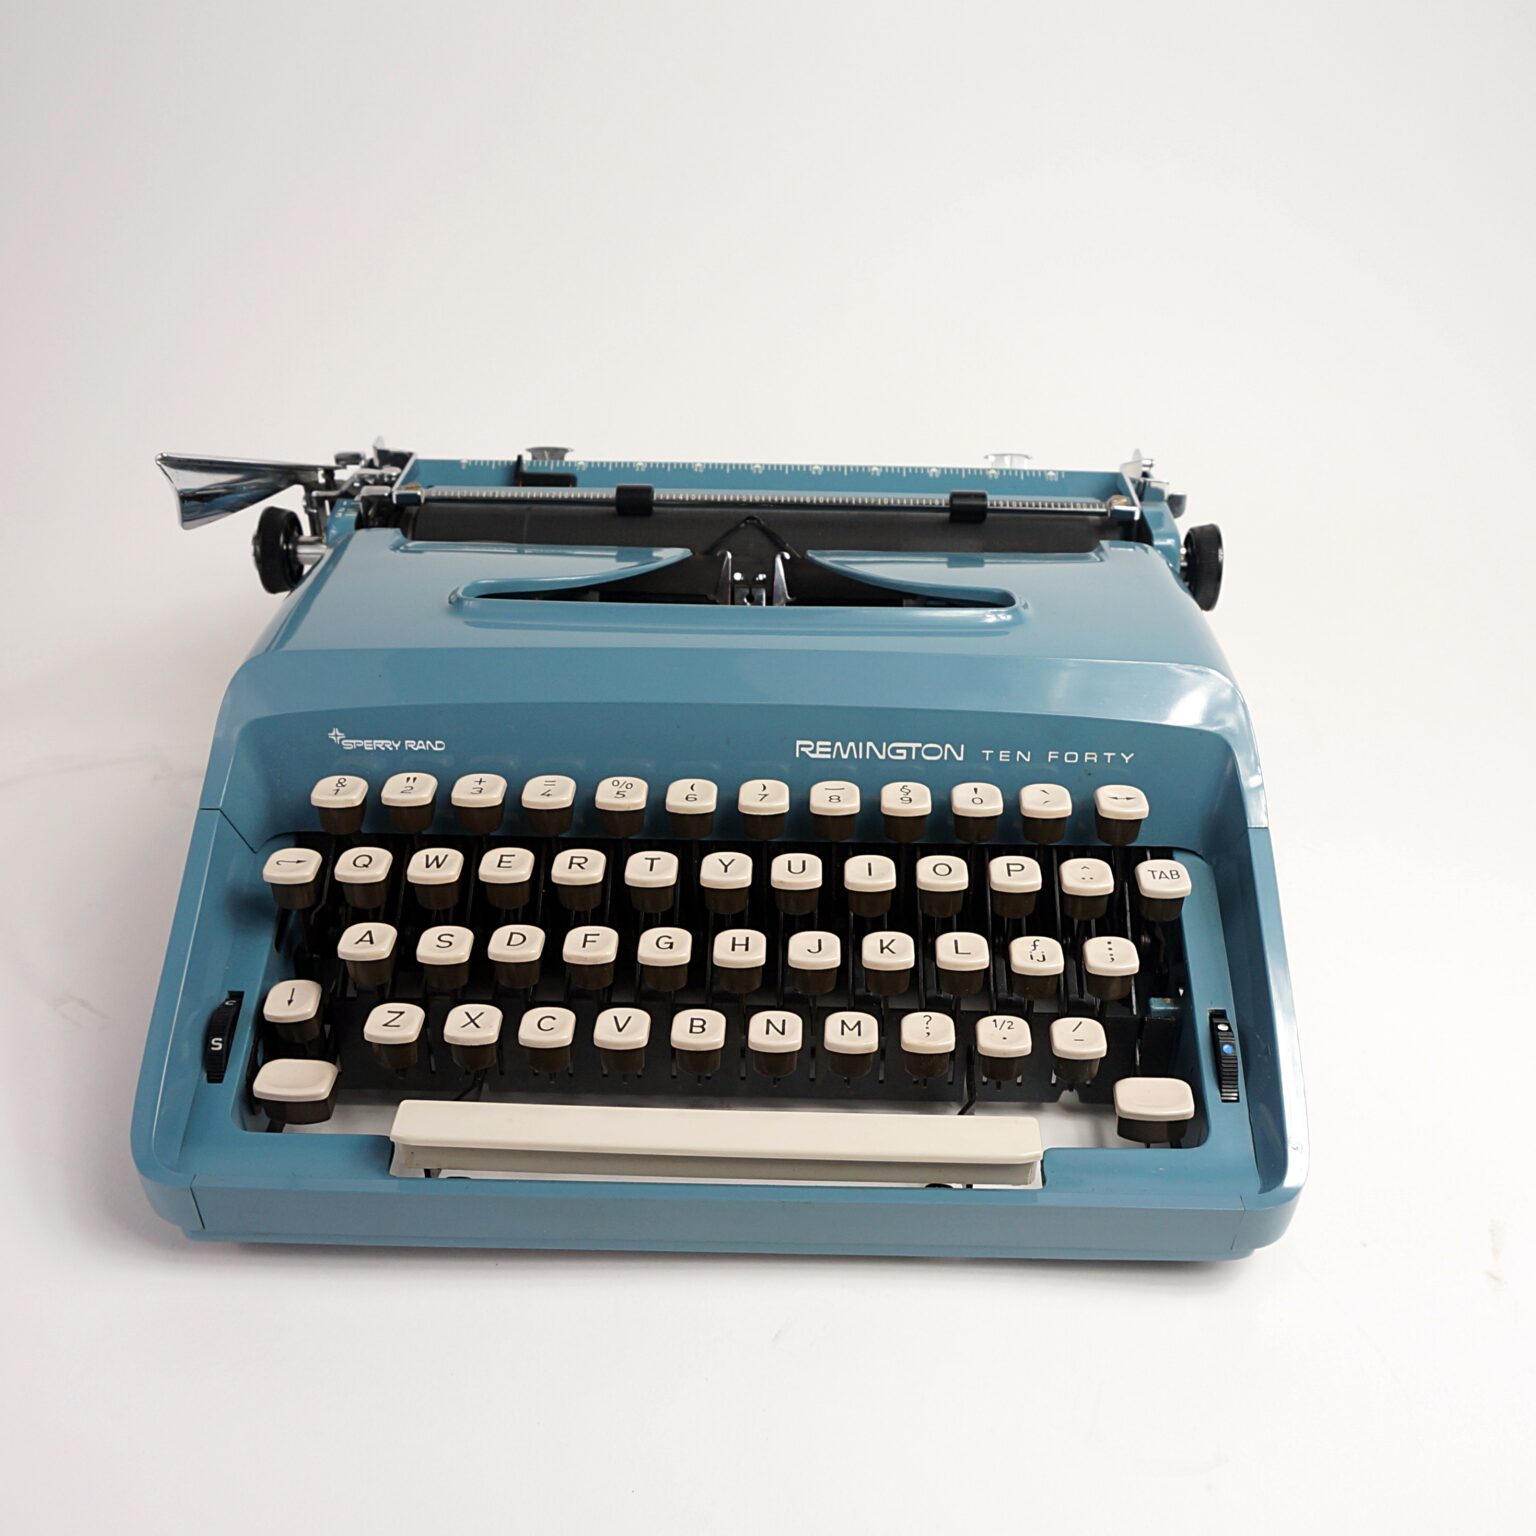 Remington Ten Forty Typewriter For Sale My Cup Of Retro Typewriters